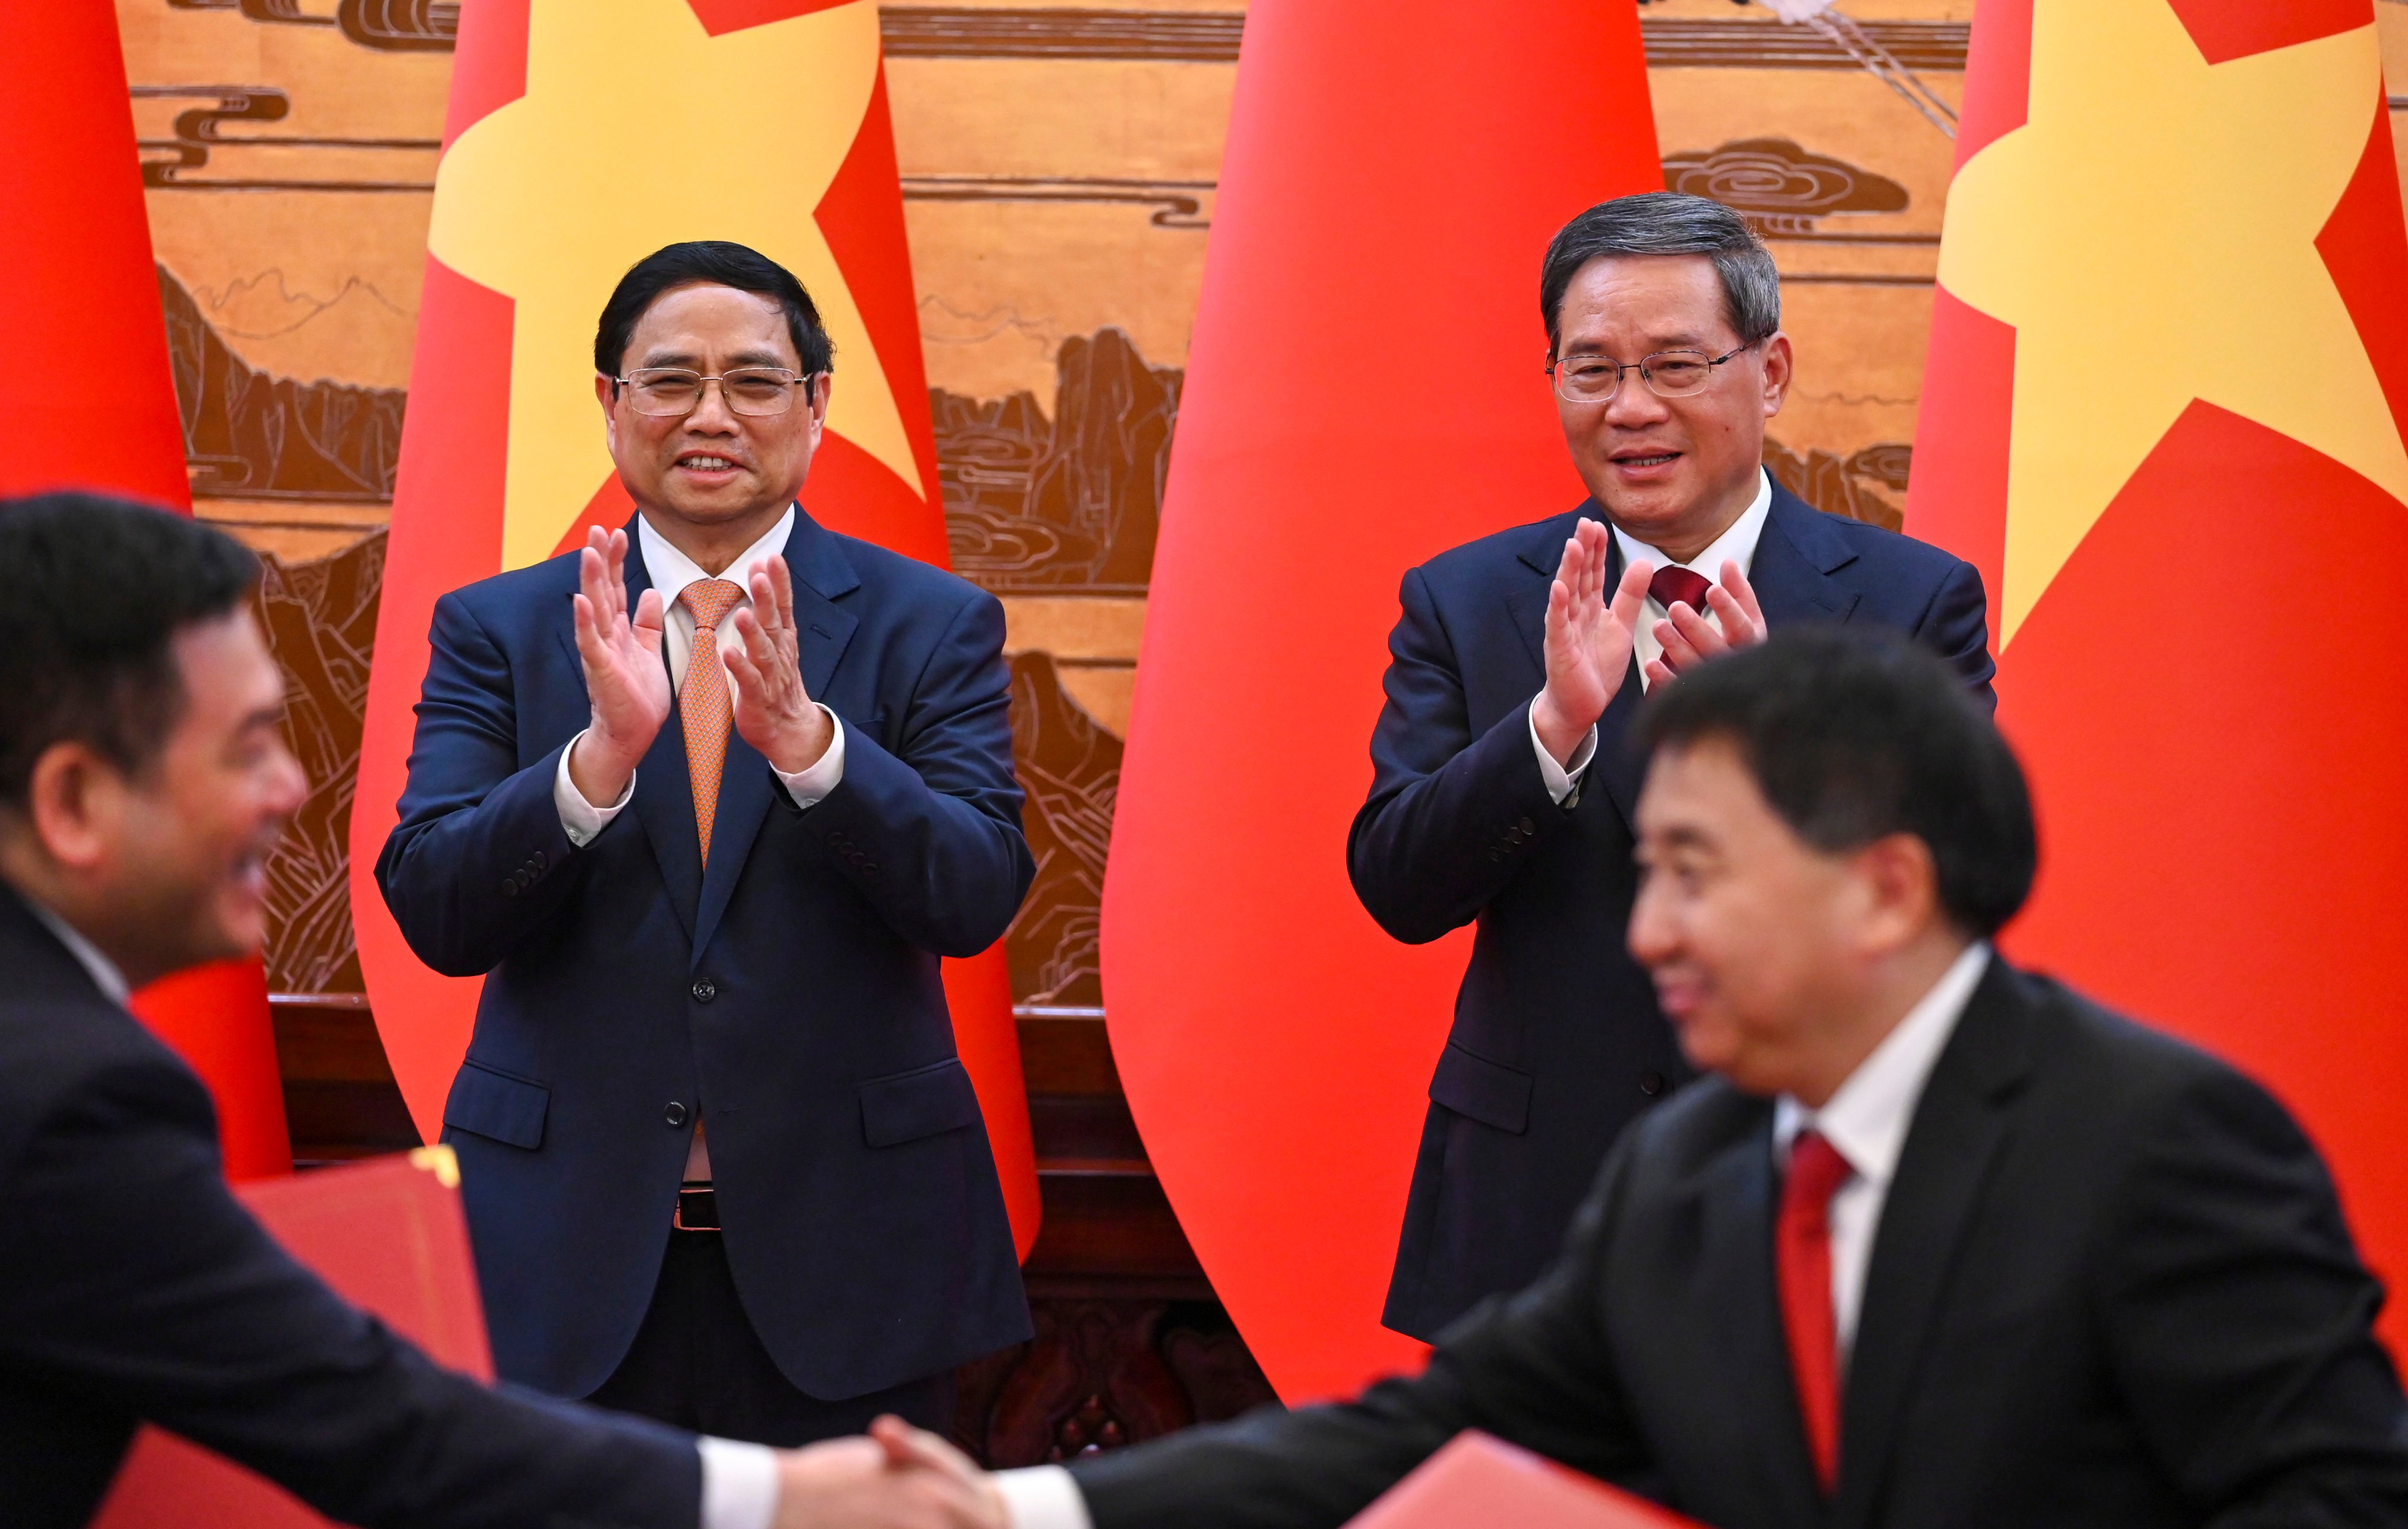 Vietnam’s Prime Minister Pham Minh Chinh (left) and Chinese Premier Li Qiang applaud the signing of an agreement at the Great Hall of the People in Beijing on Monday.  Photo: EPA-EFE